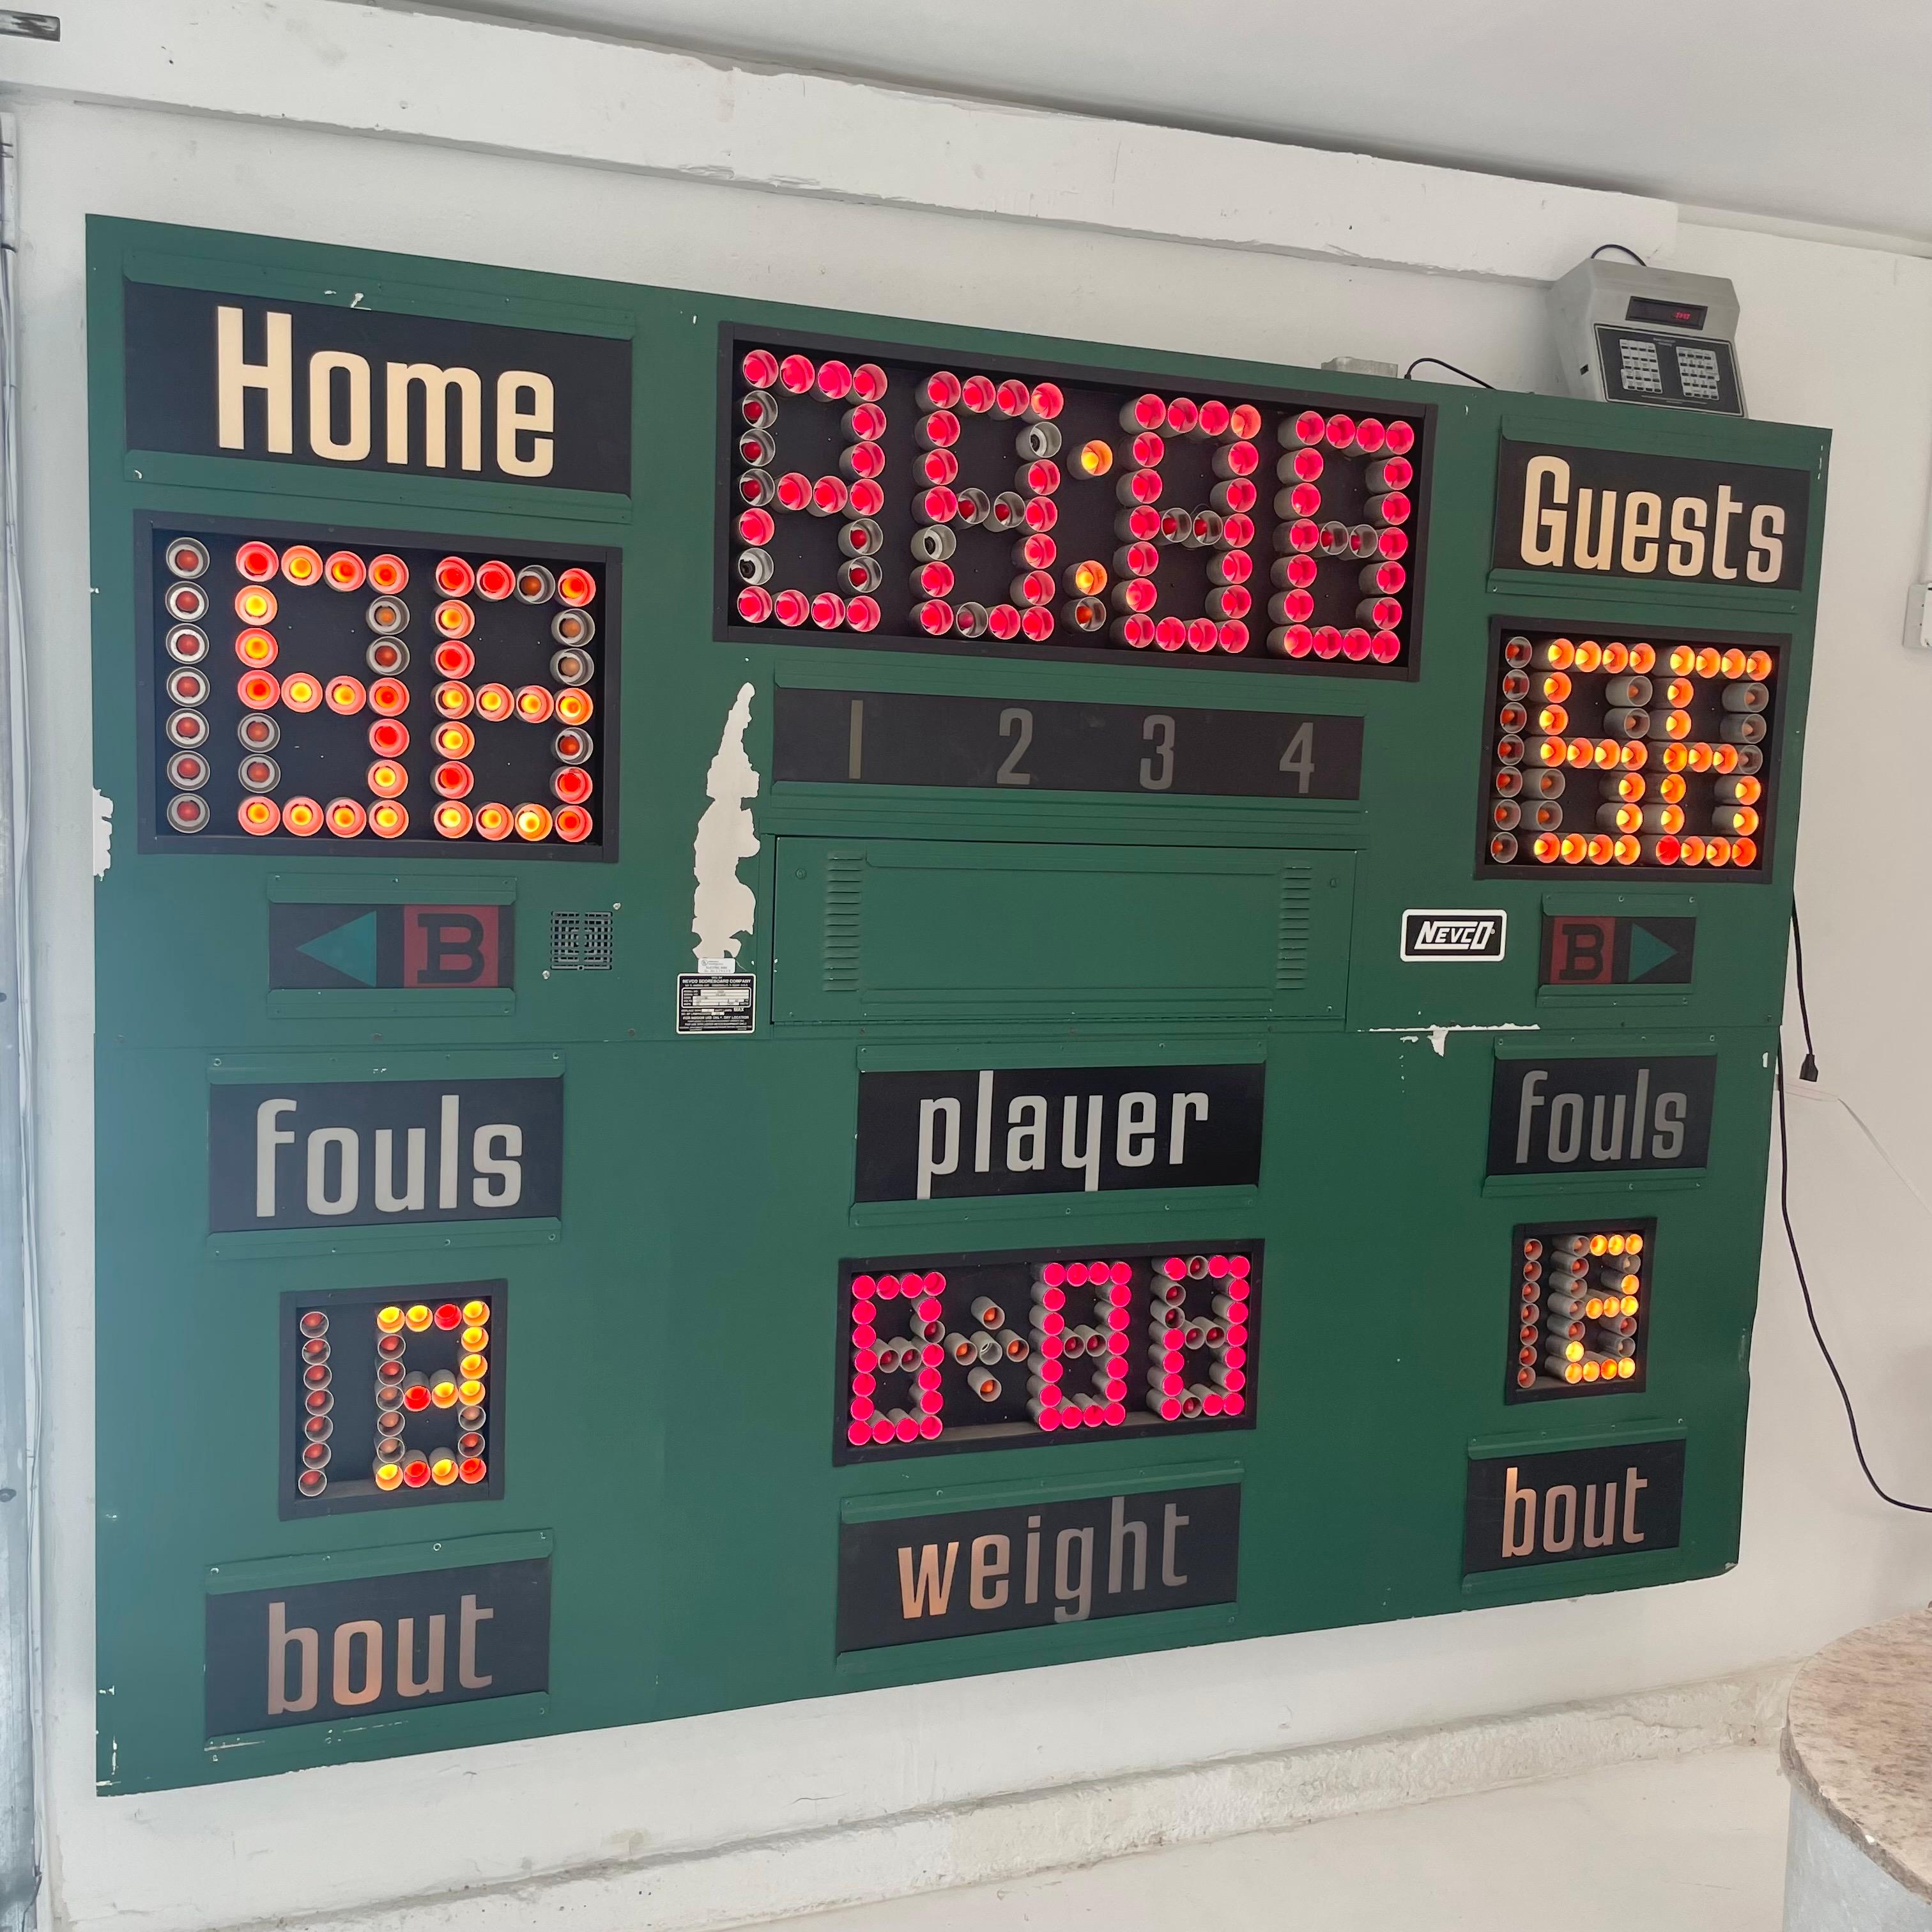 Super fun green metal scoreboard by Nevco. Made in 1998 in the US. Can be used for multiple sports. This one was made specially for wrestling. 100% functional. Running clock, guest and home score, player, fouls, weight, quarter and bonus. The player